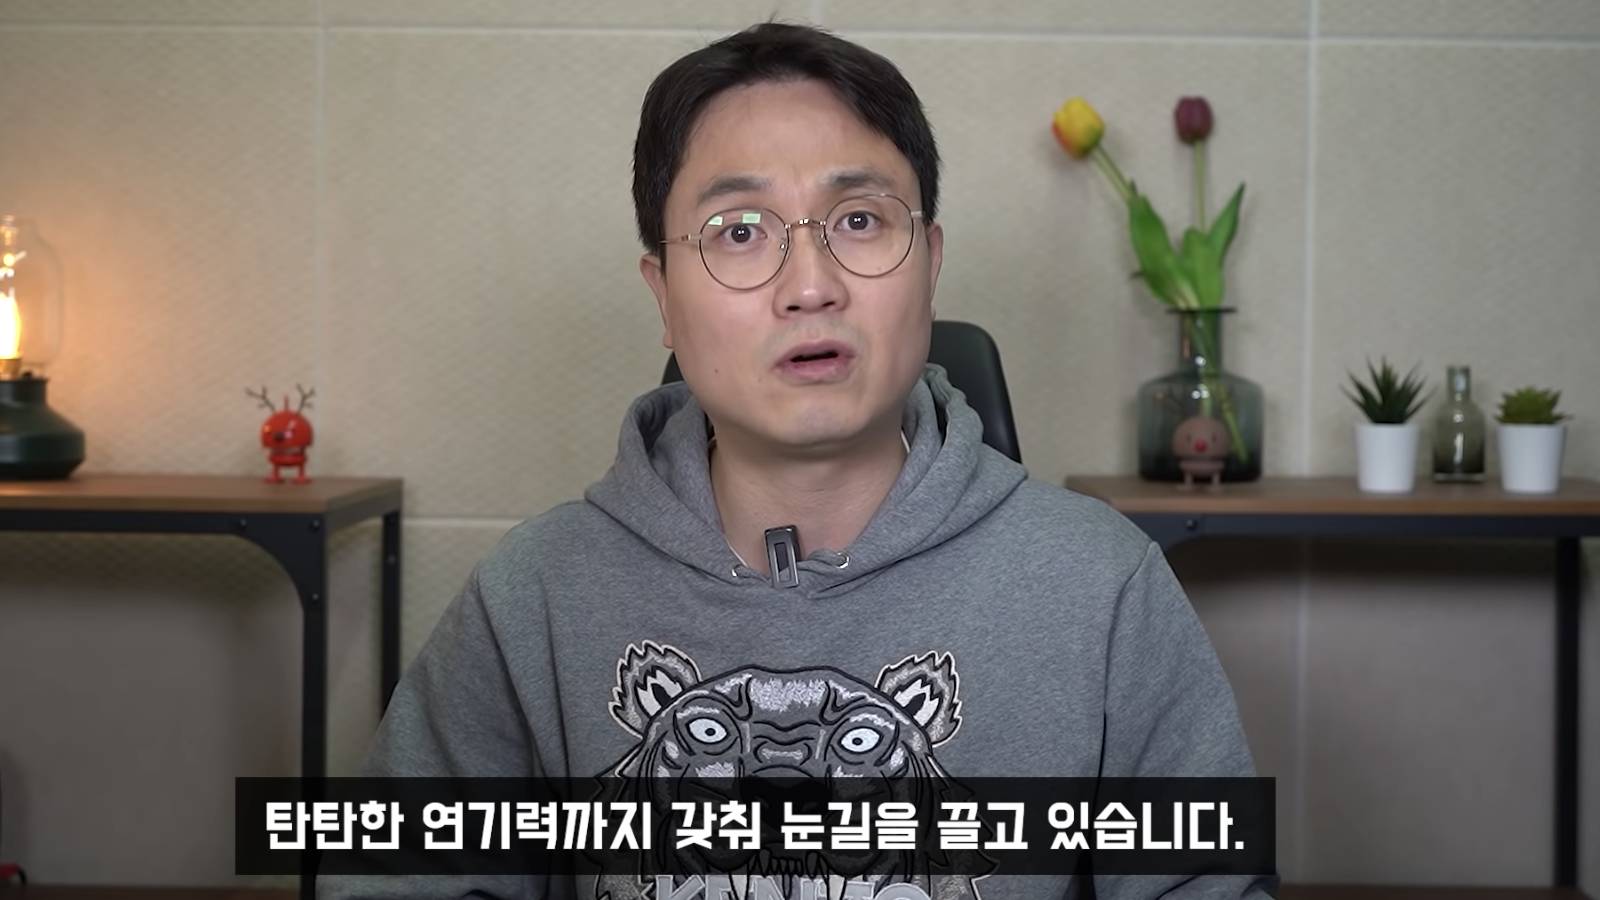 YouTuber Lee Jin Ho had nothing but praise for the actor